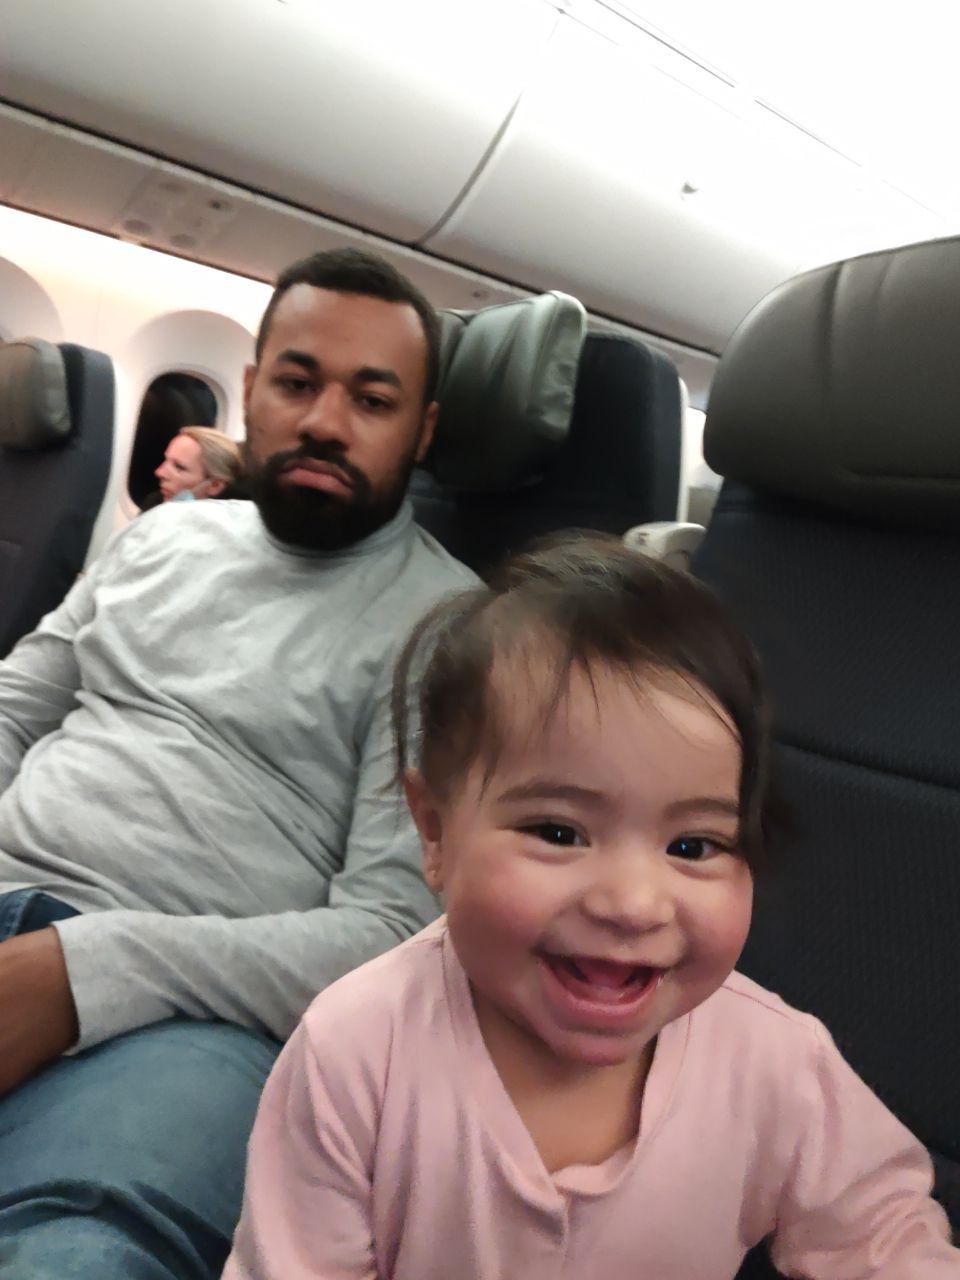 My daughter after screaming on the plane for 2 hours straight.